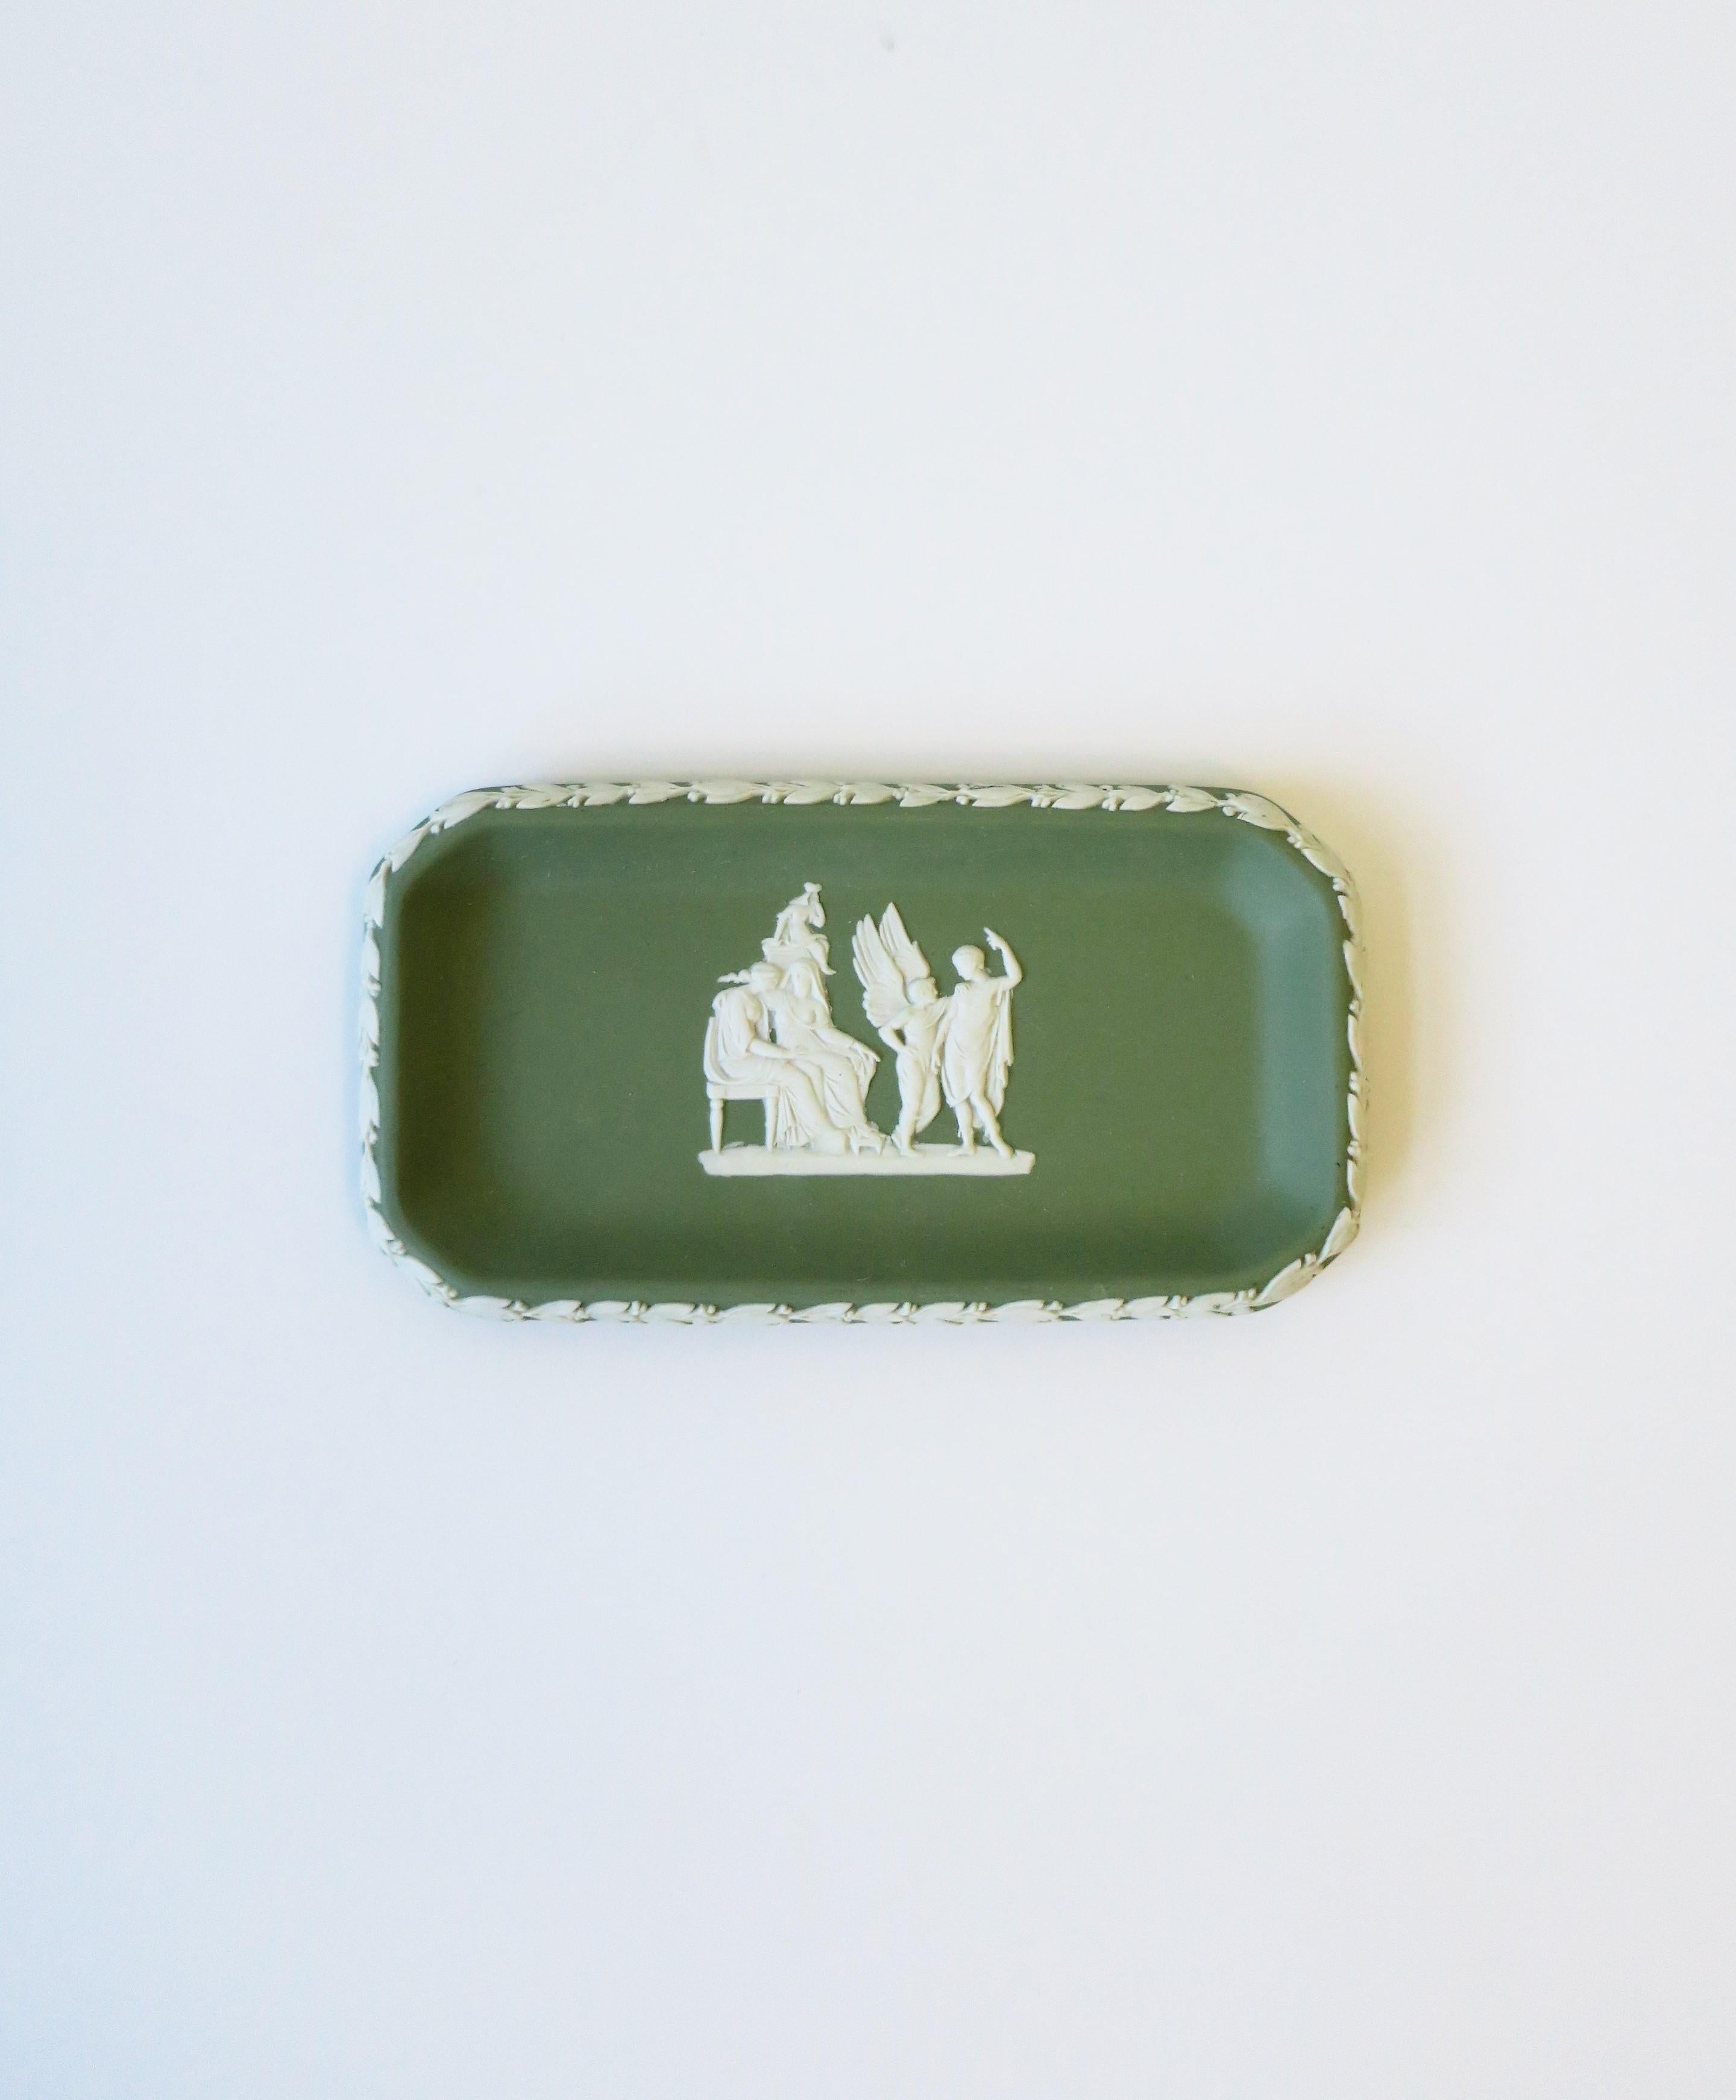 A beautiful English Wedgwood Jasperware small rectangular jewelry dish with Neoclassical design, 1961, England. Piece is a matte stoneware in a light green with a white Neoclassical raised relief at center and leaf design around edge. Great as a